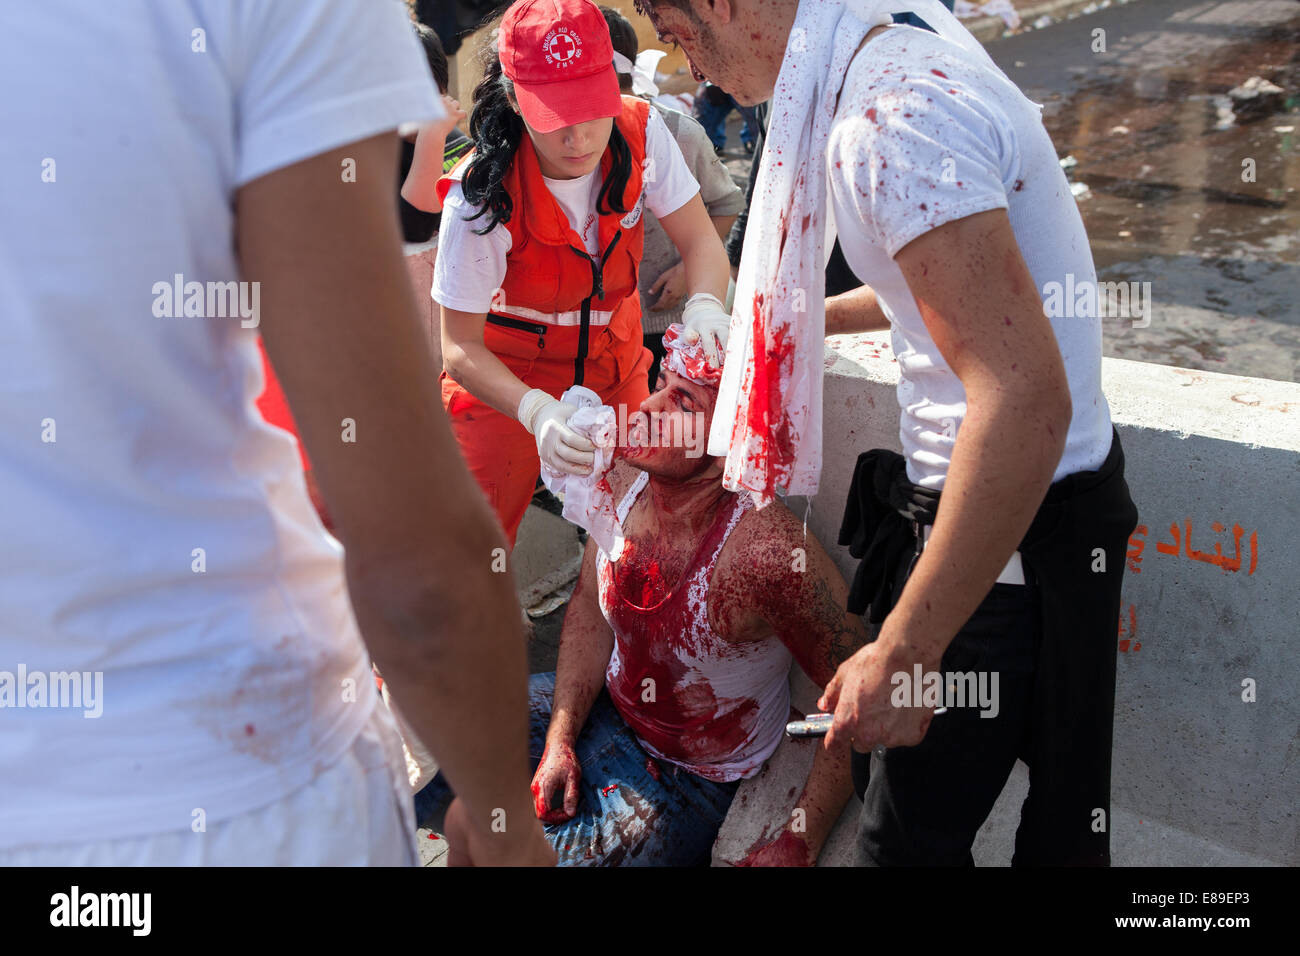 Shiite Muslim man, covered in his own blood, receiving medical attention, on Ashura Day in Nabatieh, Lebanon. Stock Photo